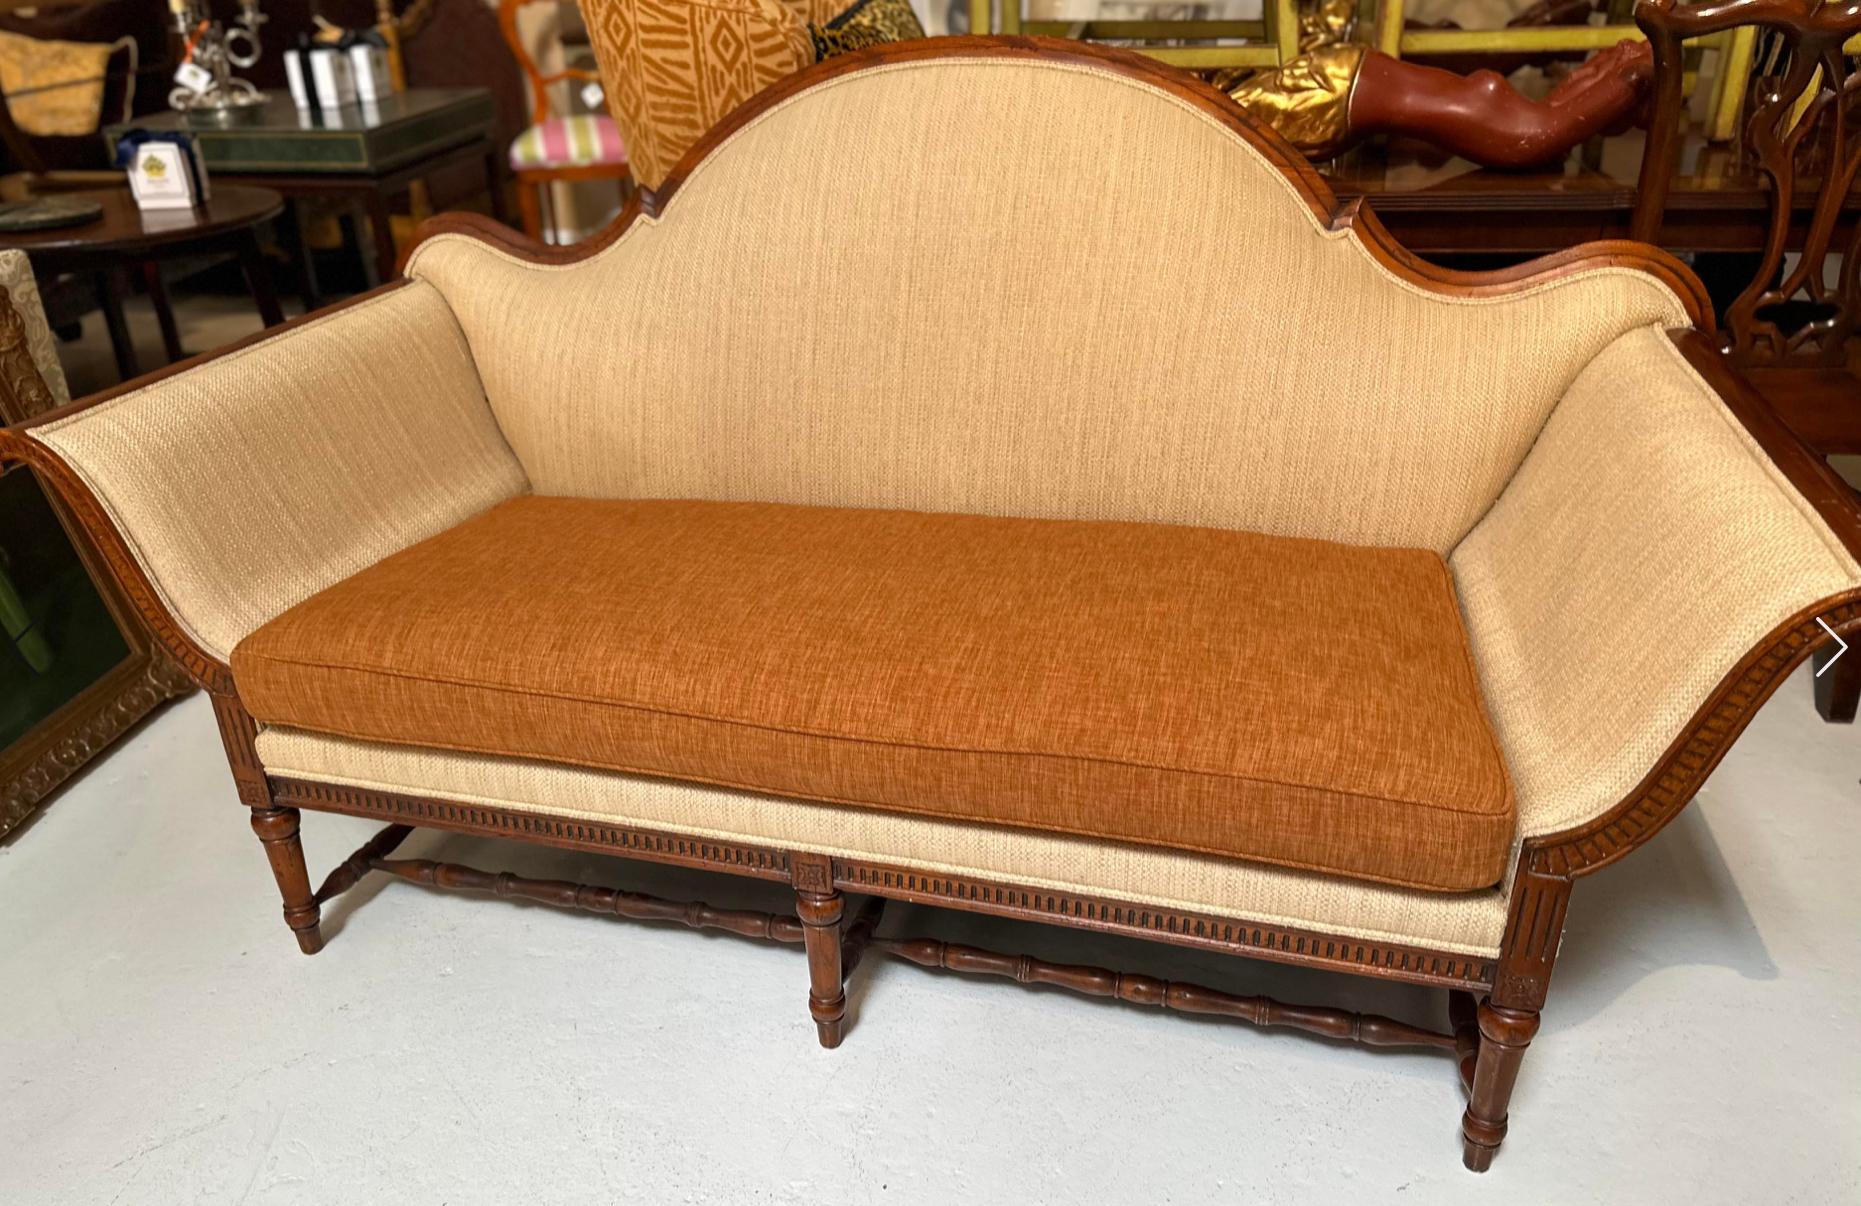 Alfonso Marina for Ebanista Gondola Sofa Settee. 
Leather Ebanista embroidered logo pillow sold separately and is not included.